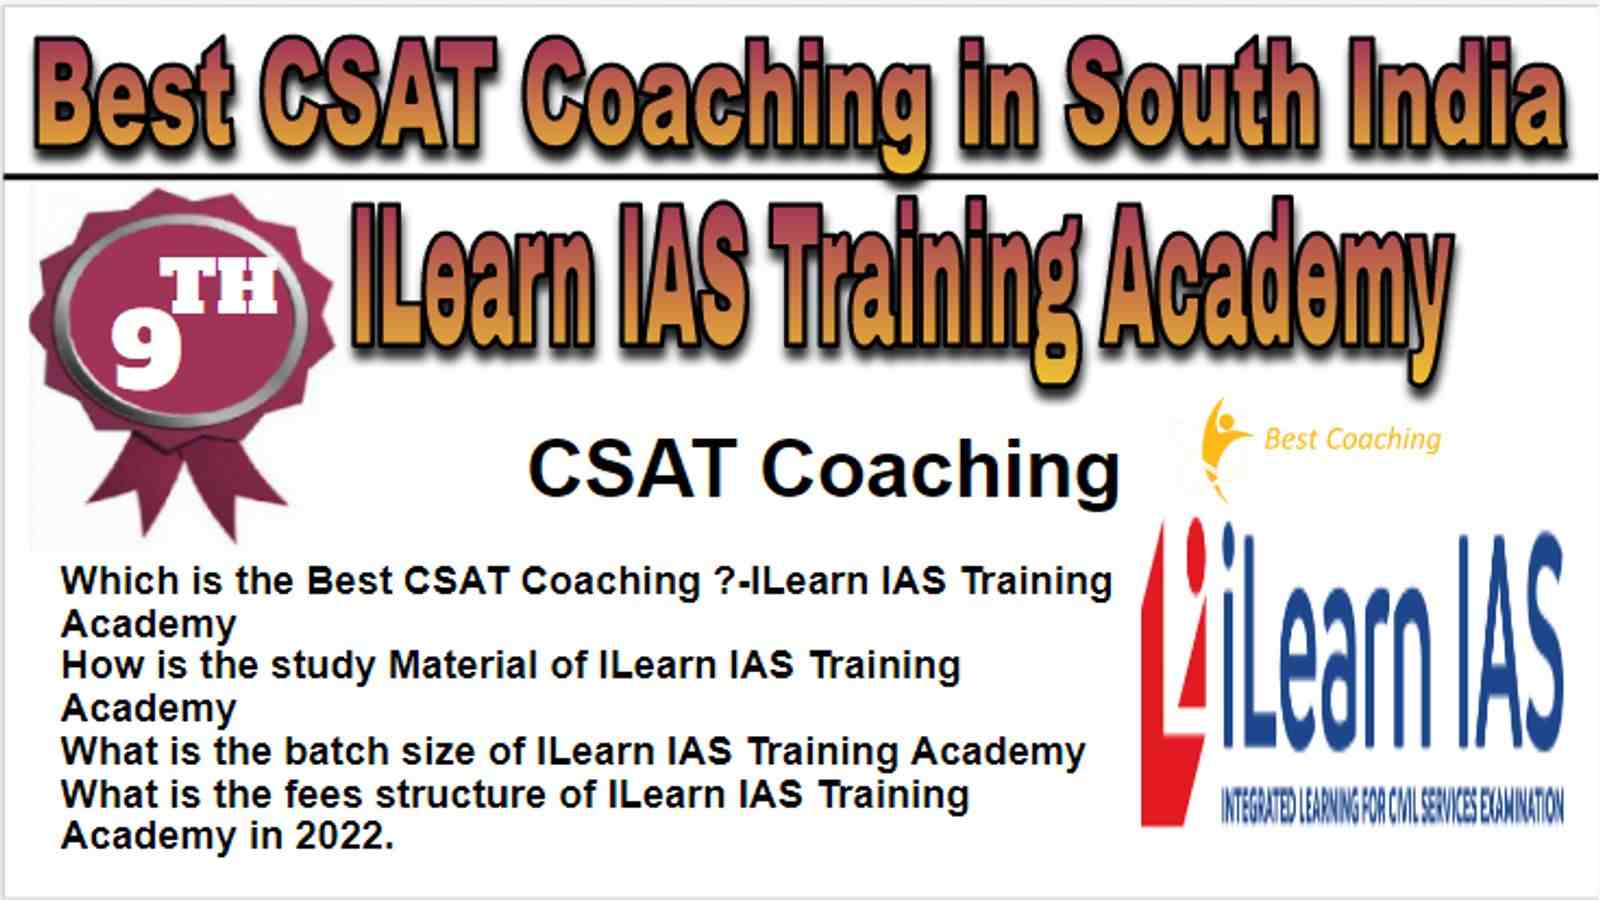 Rank 9 Best CSAT Coaching in South India